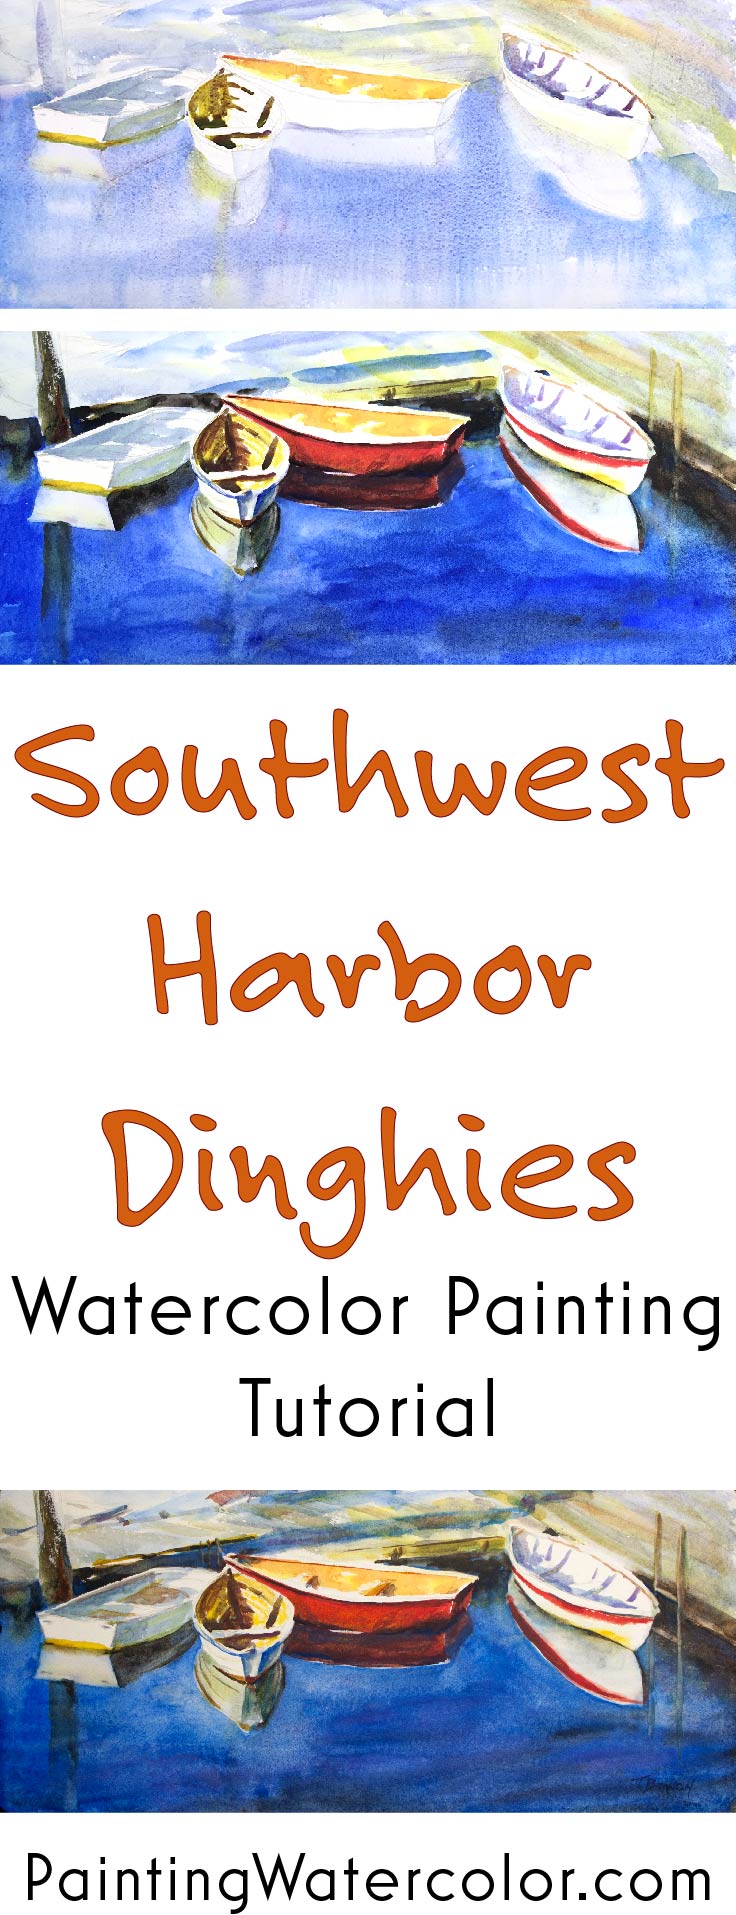 Southwest Harbor Dinghies Reflections watercolor painting tutorial by Jennifer Branch